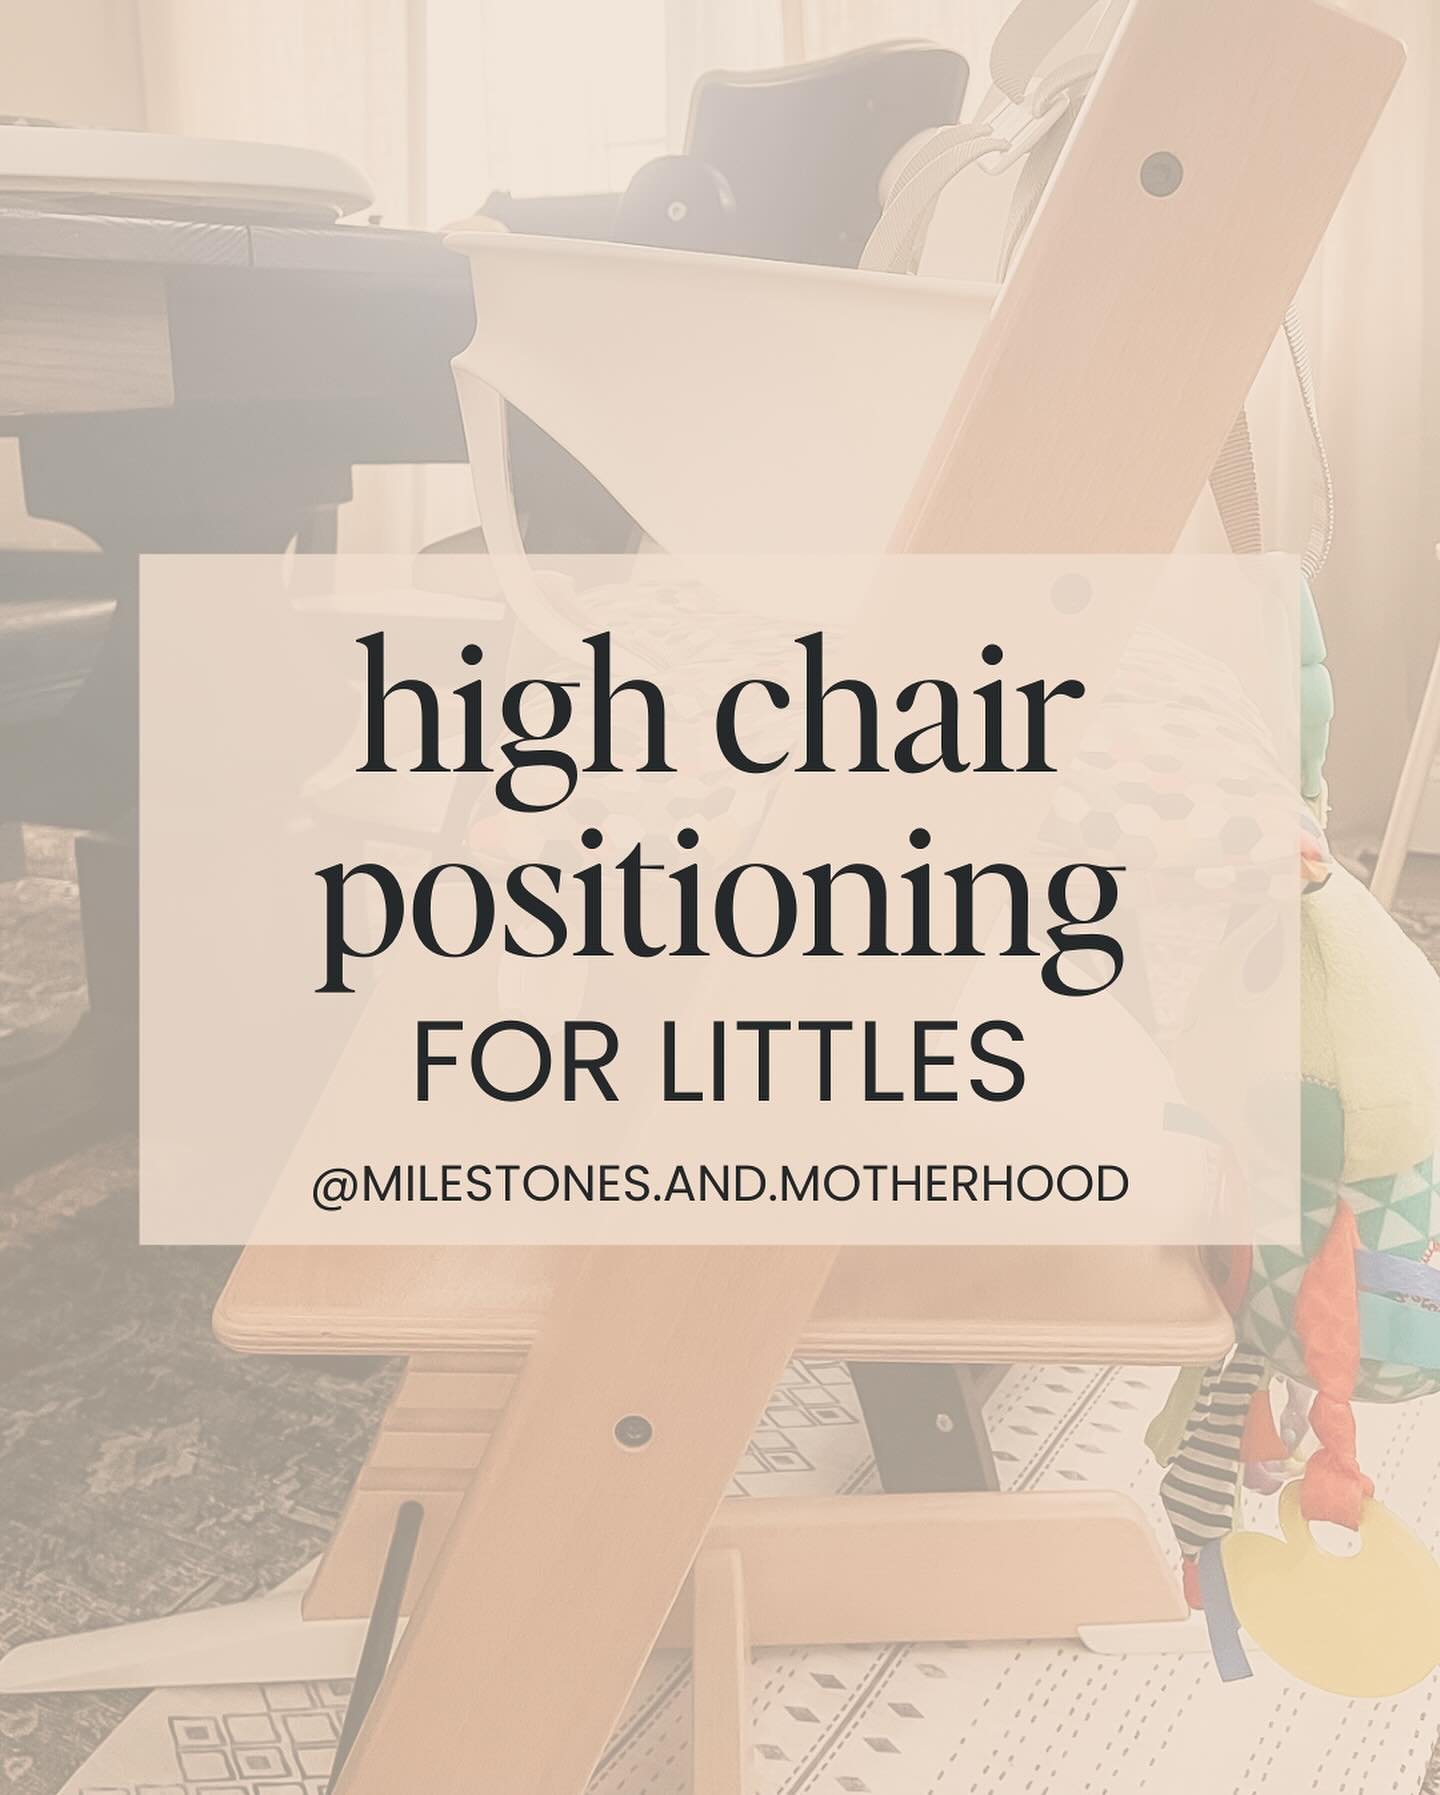 Let&rsquo;s talk about ideal positioning in highchairs!

While these are *IDEAL*, please don&rsquo;t panic if these don&rsquo;t work for your child for whatever reason. They&rsquo;re MOST important for a child that may have lower muscle tone, lower c